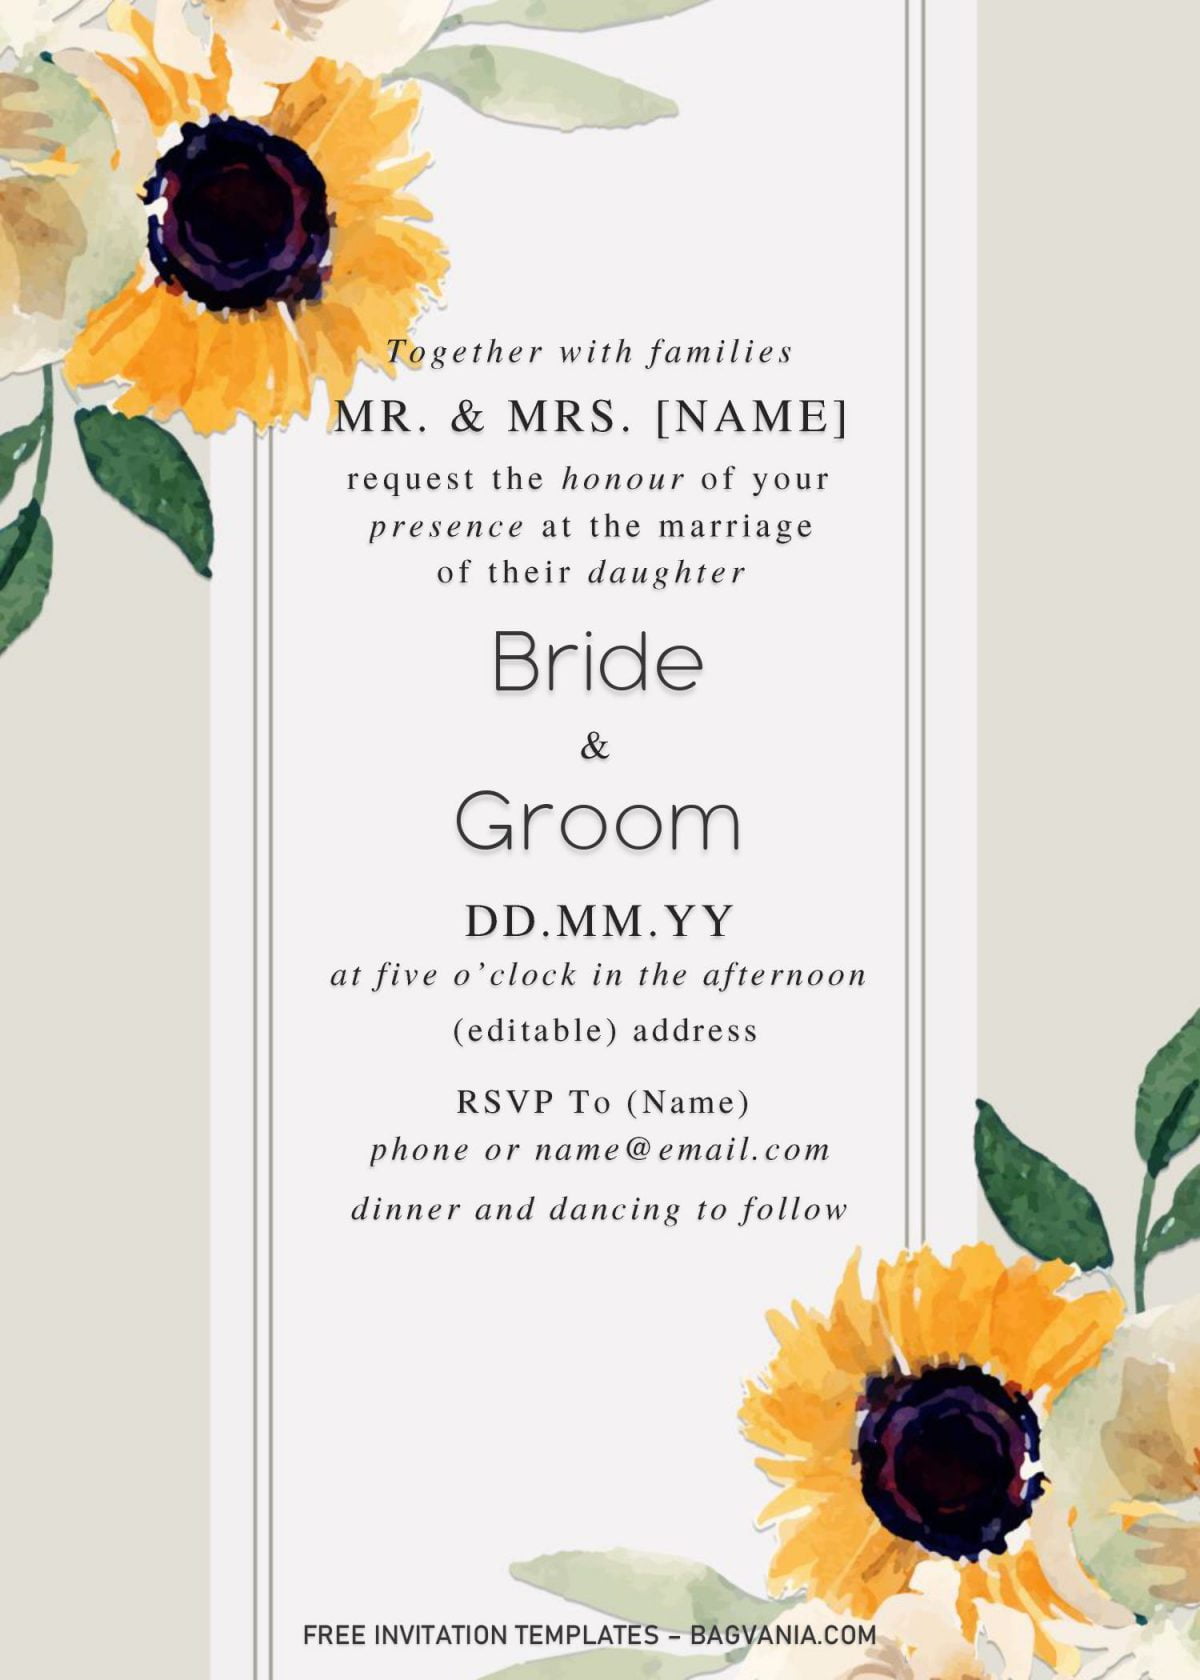 Sunflower Wedding Invitation Templates - Editable With Microsoft Word and has watercolor sunflowers